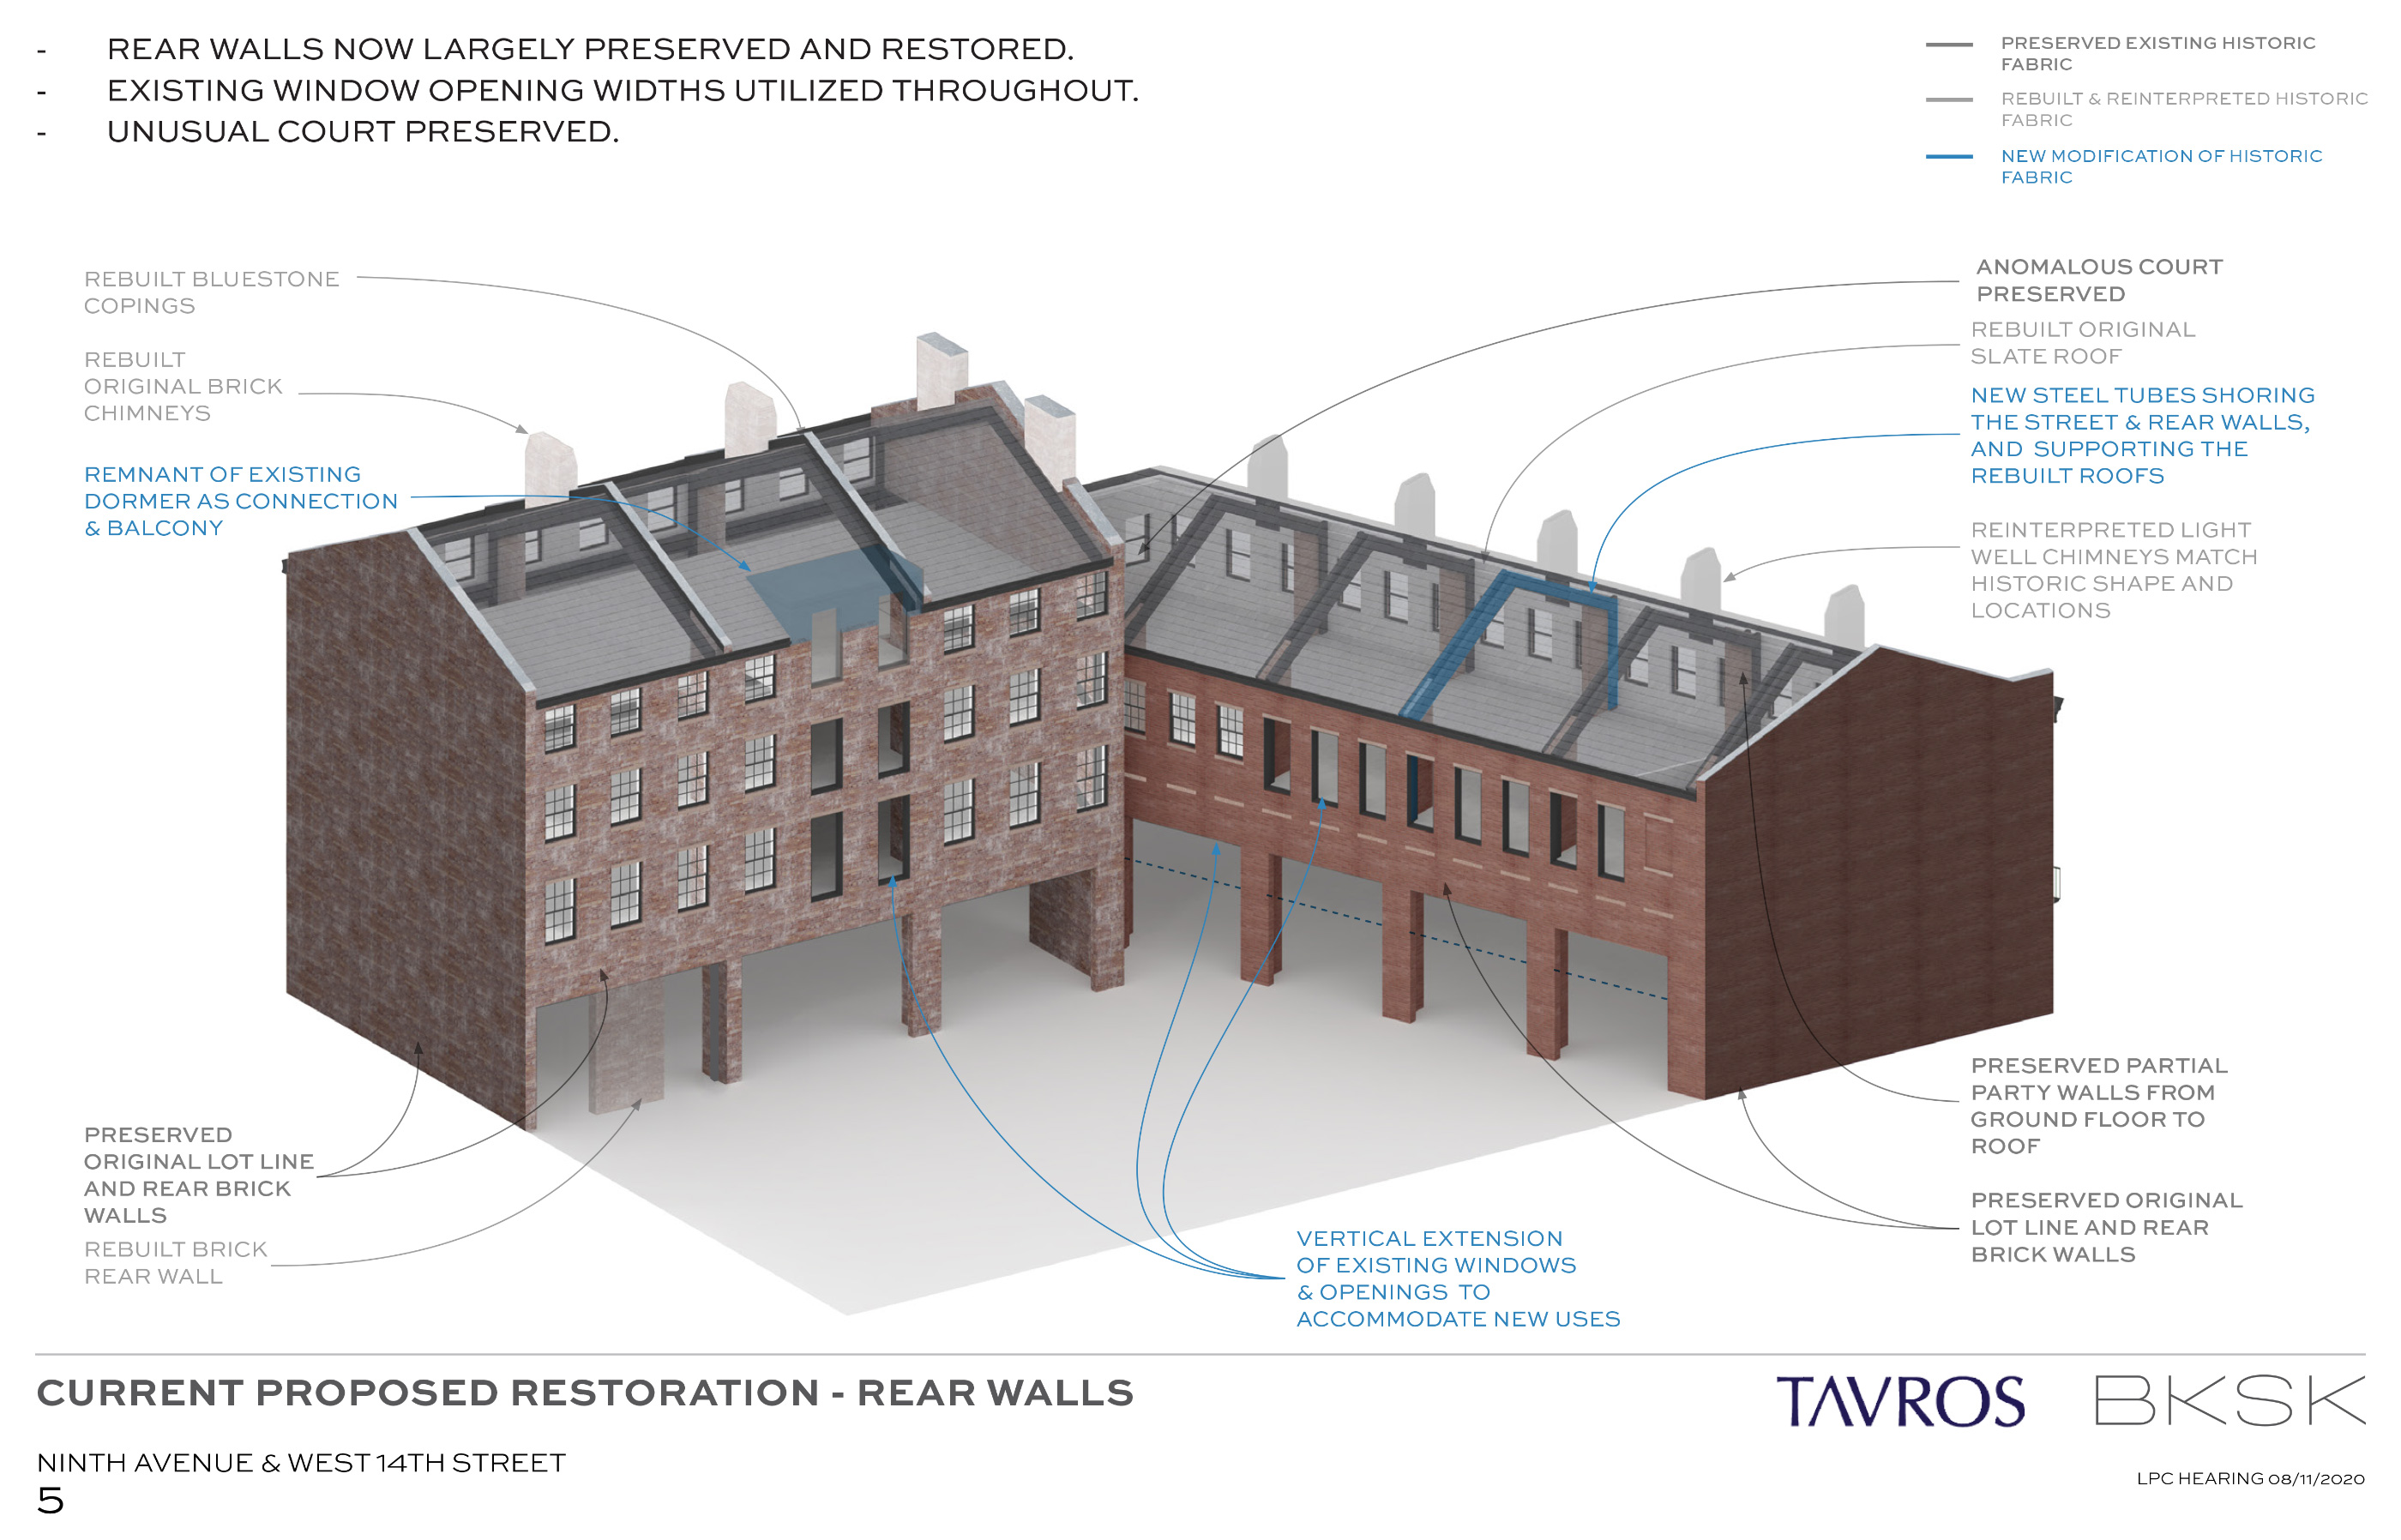 A diagram detailing rear wall restorations in a section of townhouses